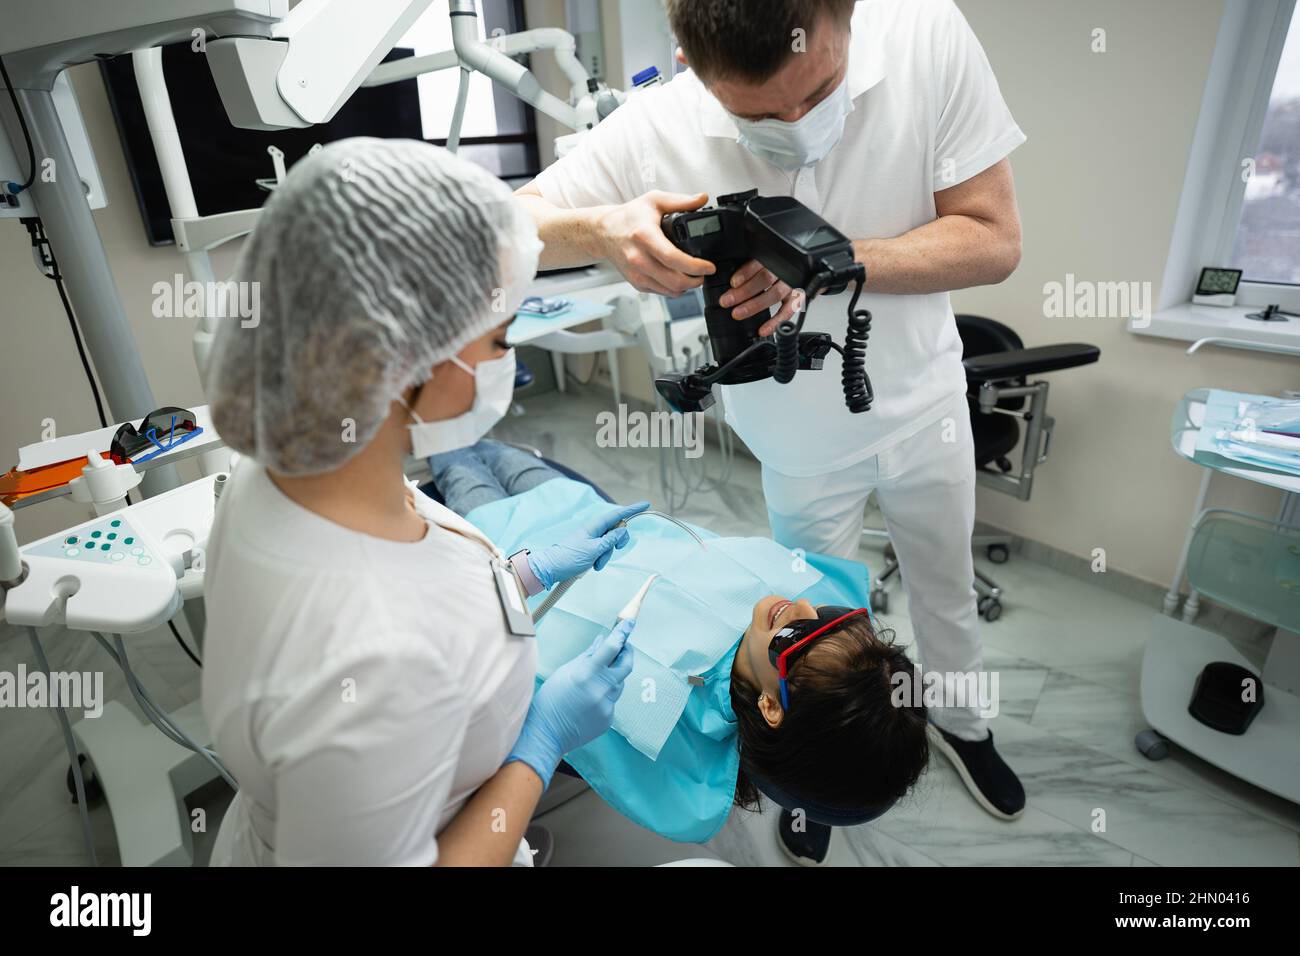 Dentist uses a photo camera to examine a patient  Stock Photo